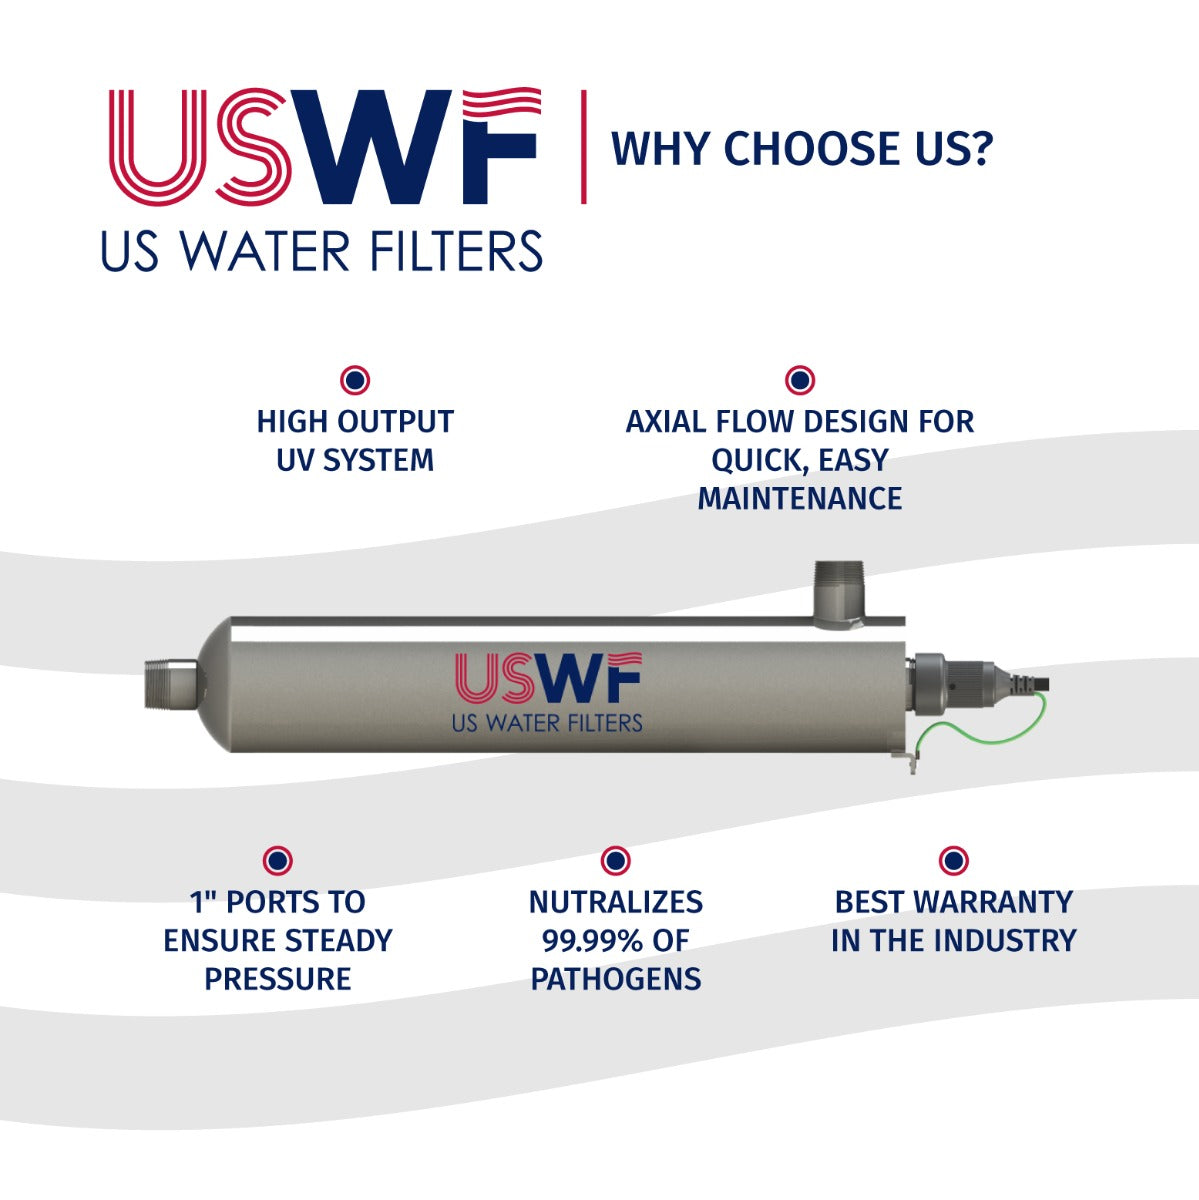 RCHO4.12 USWF UV Disinfection System | Replacement Controller for USWF-4C101, 4C151, & 4CR2